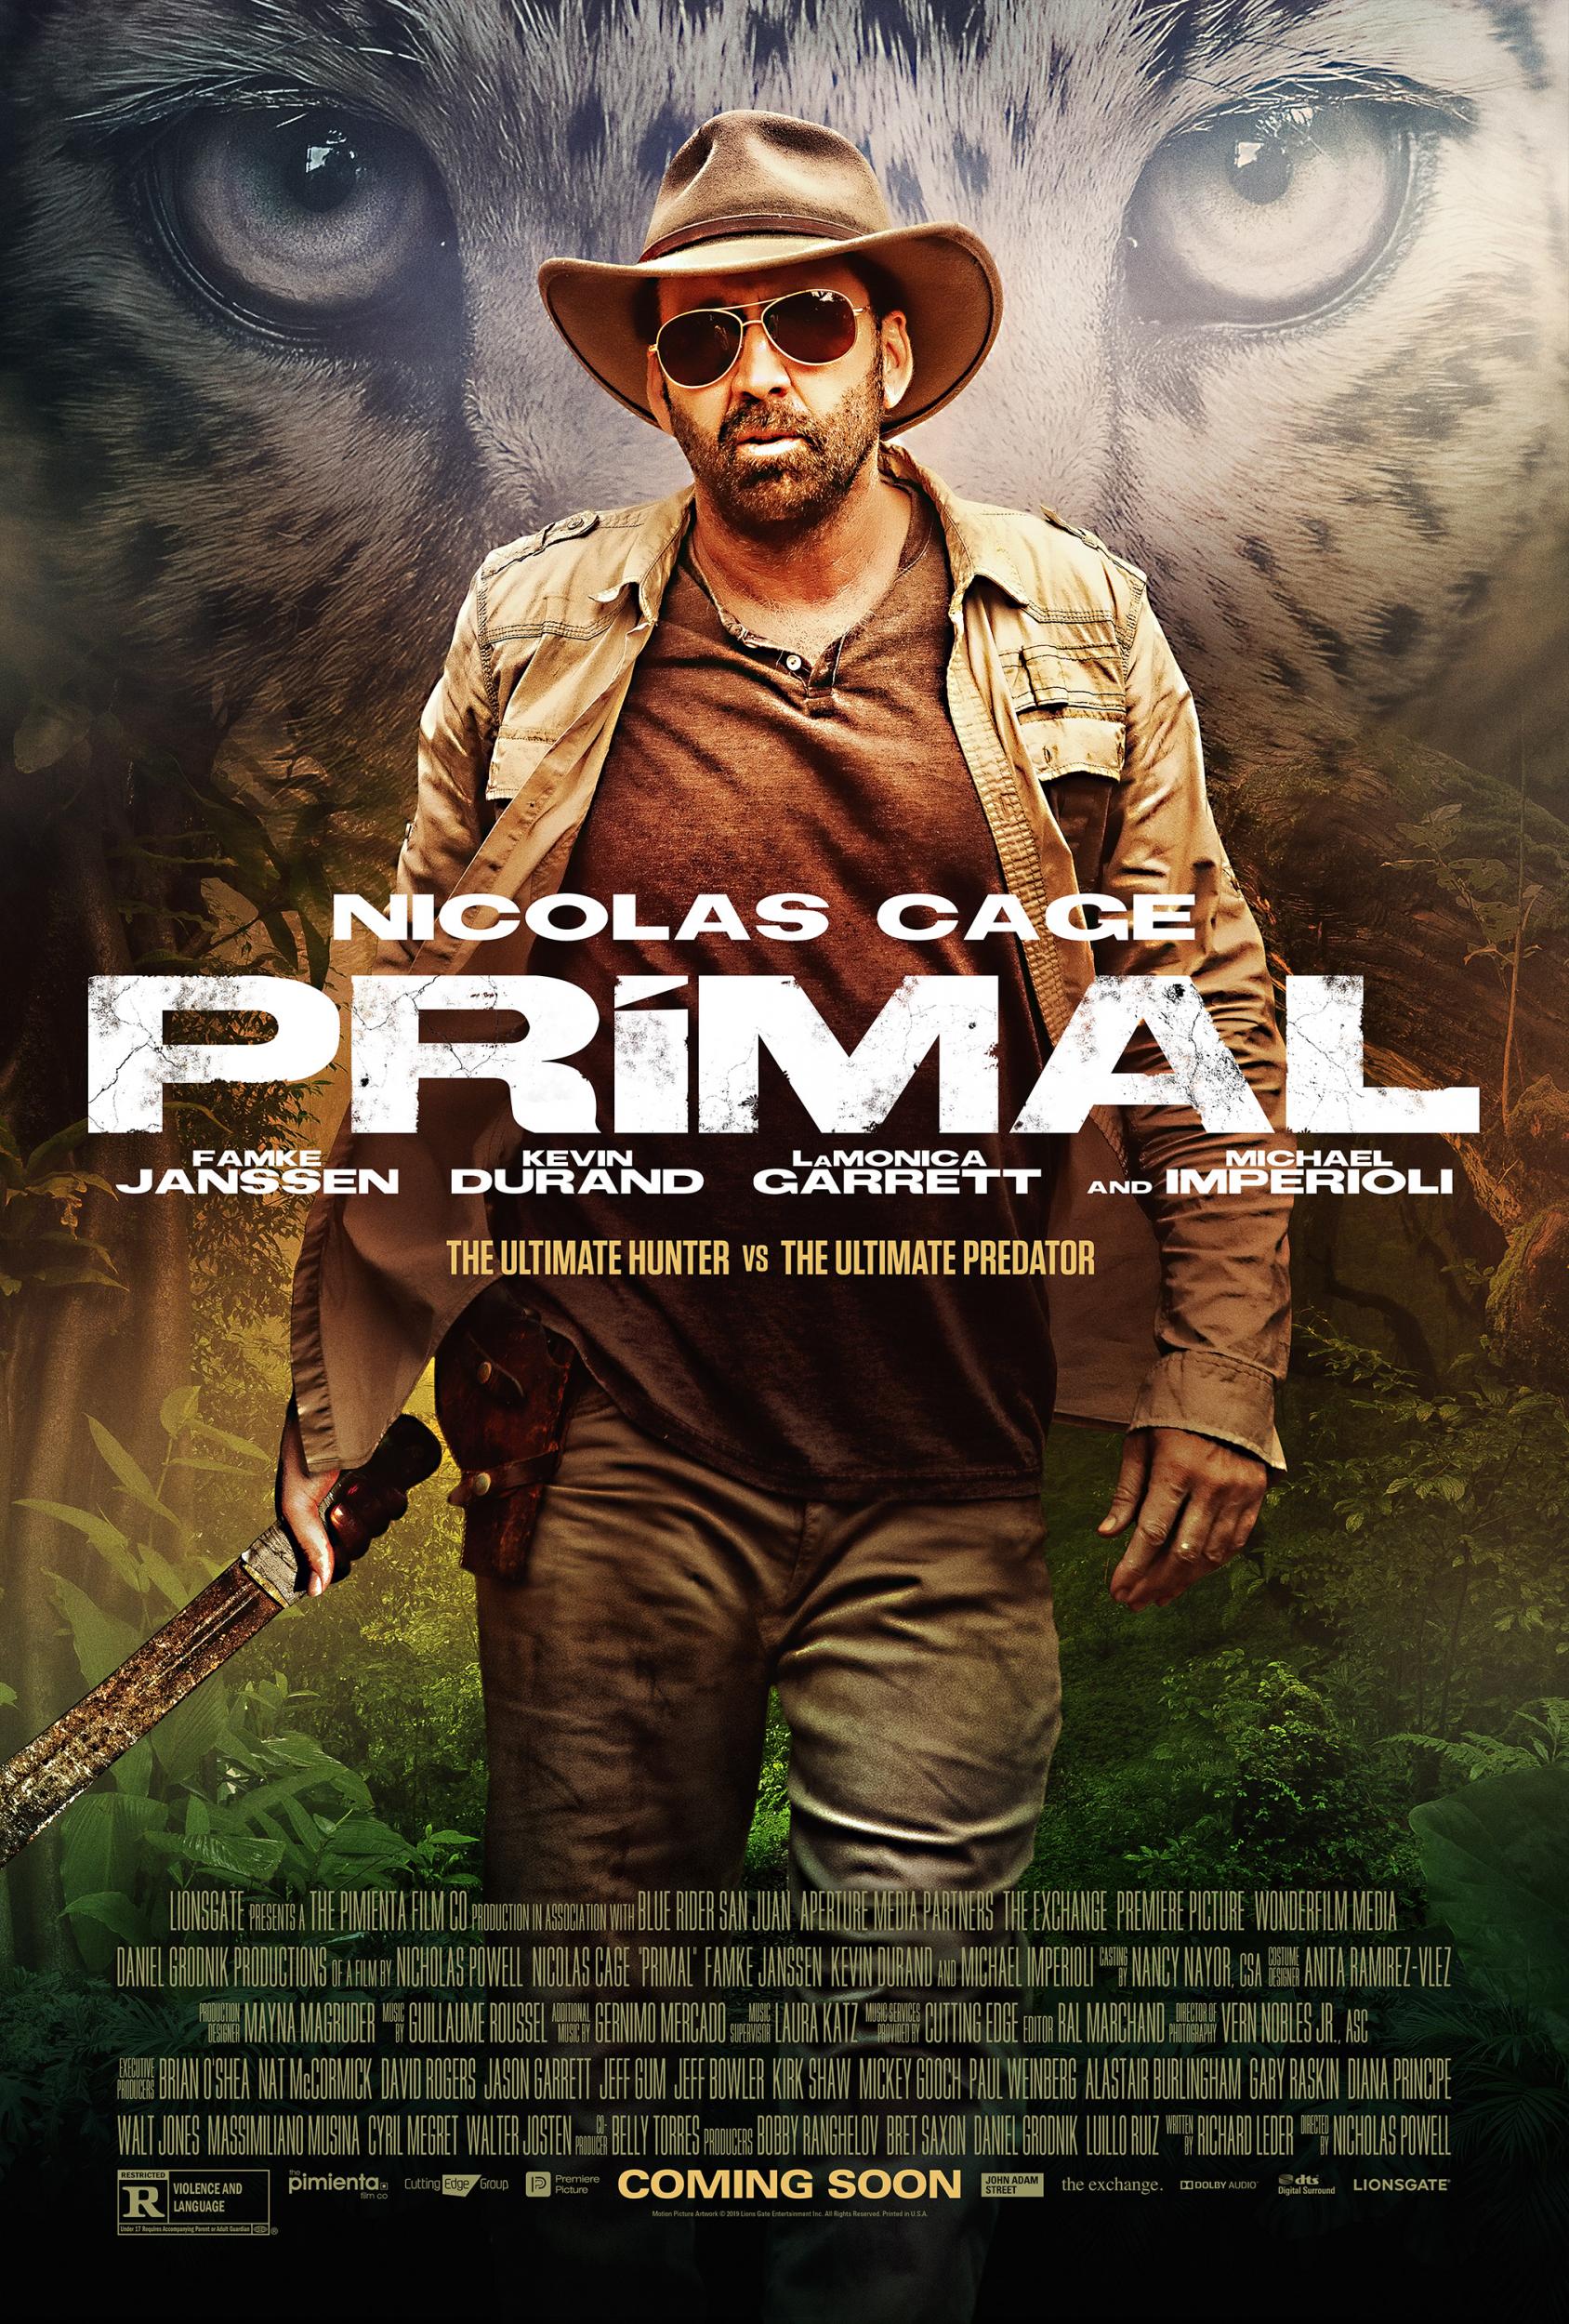 The poster for Cage’s latest film ‘Primal’